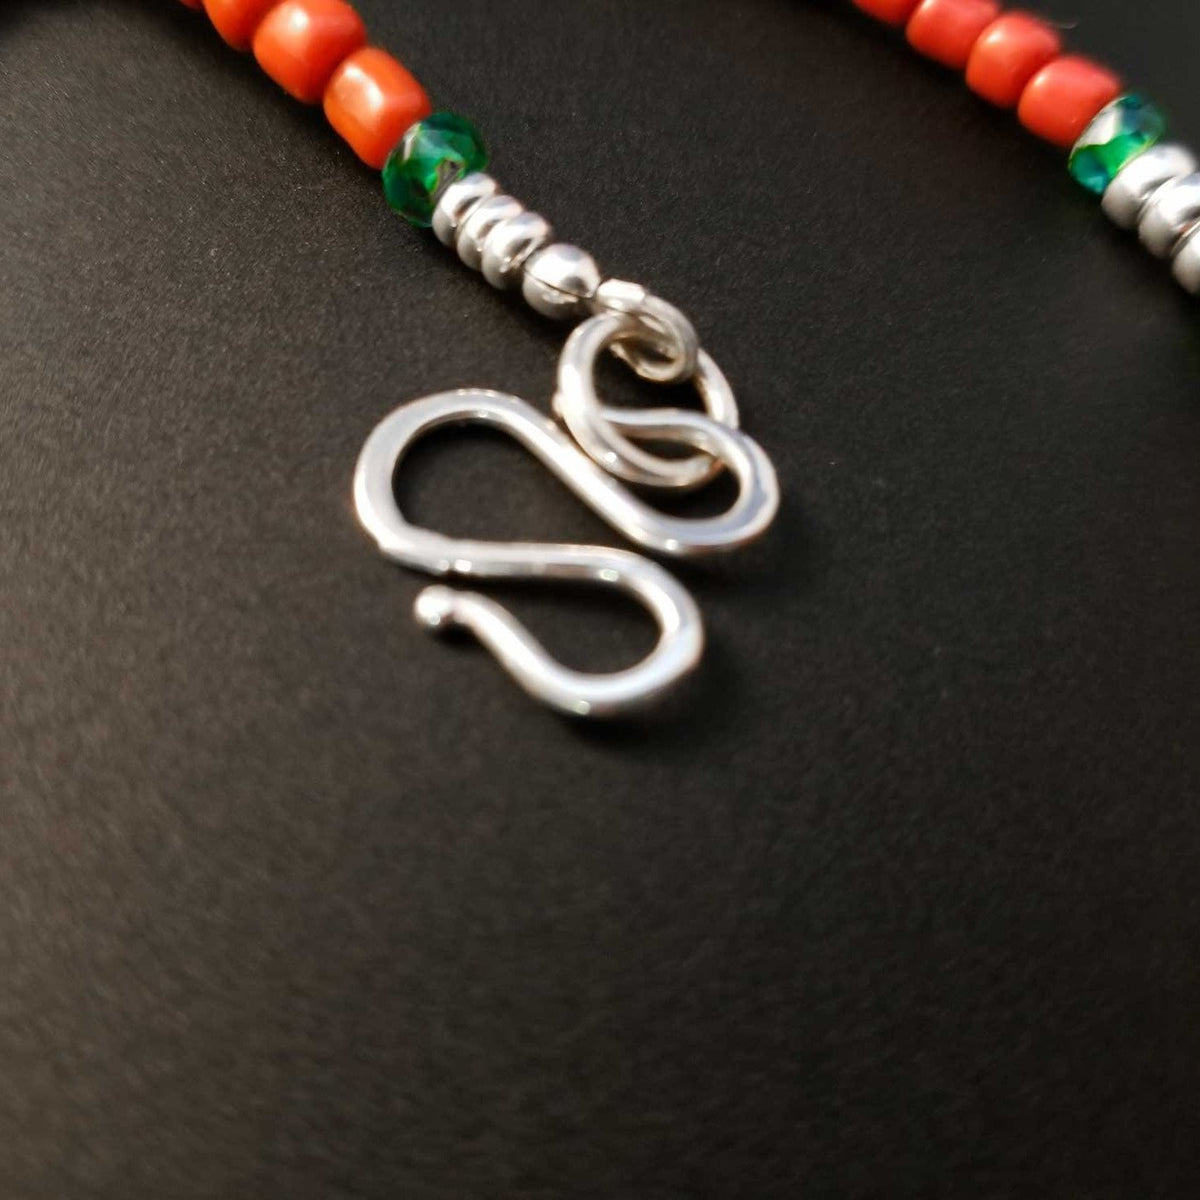 S hook silver clasp on red bead necklace